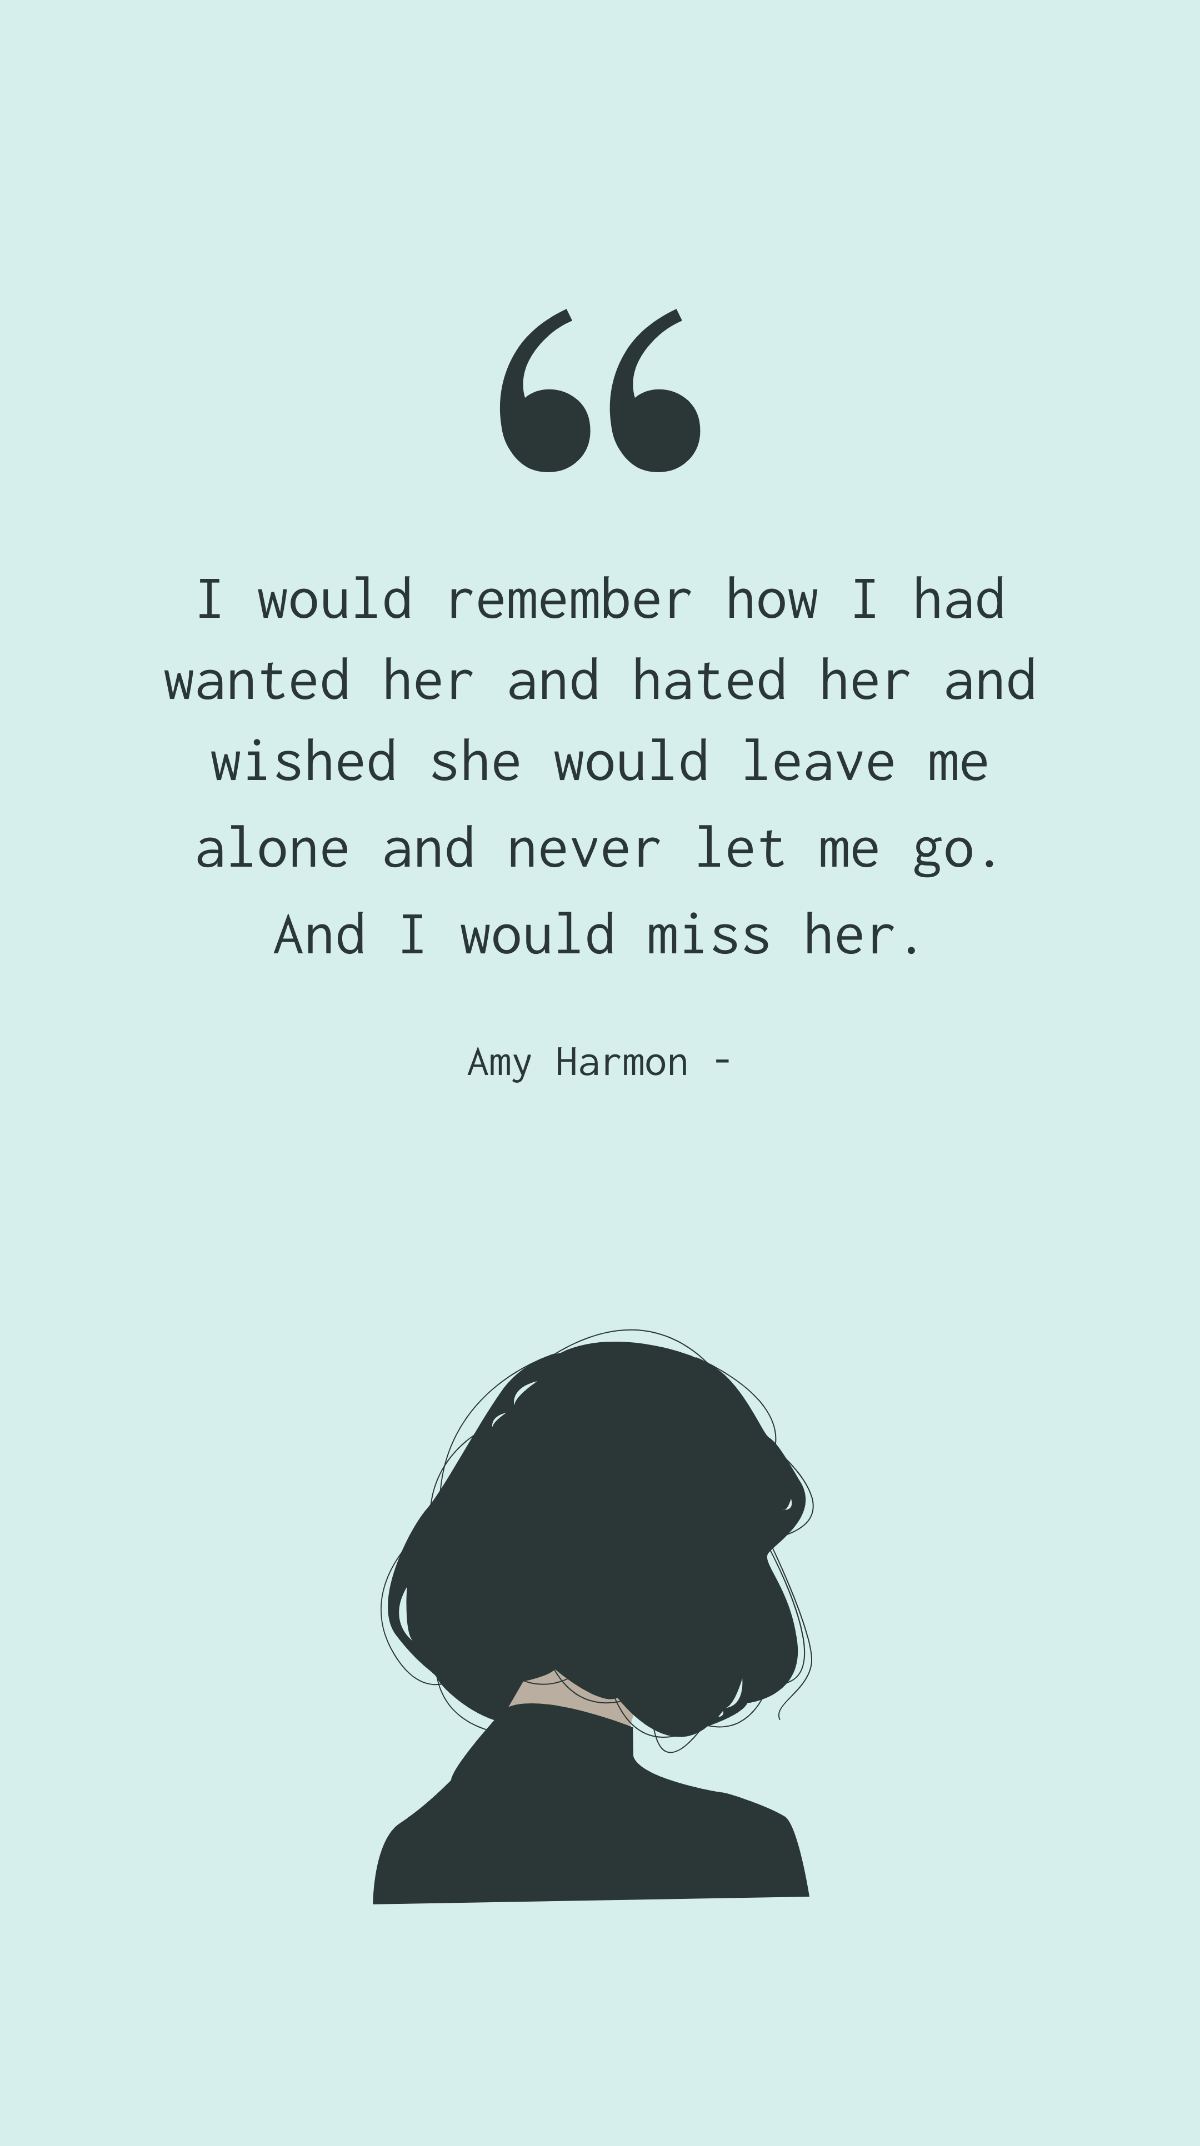 Free Amy Harmon - I would remember how I had wanted her and hated her and wished she would leave me alone and never let me go. And I would miss her. Template